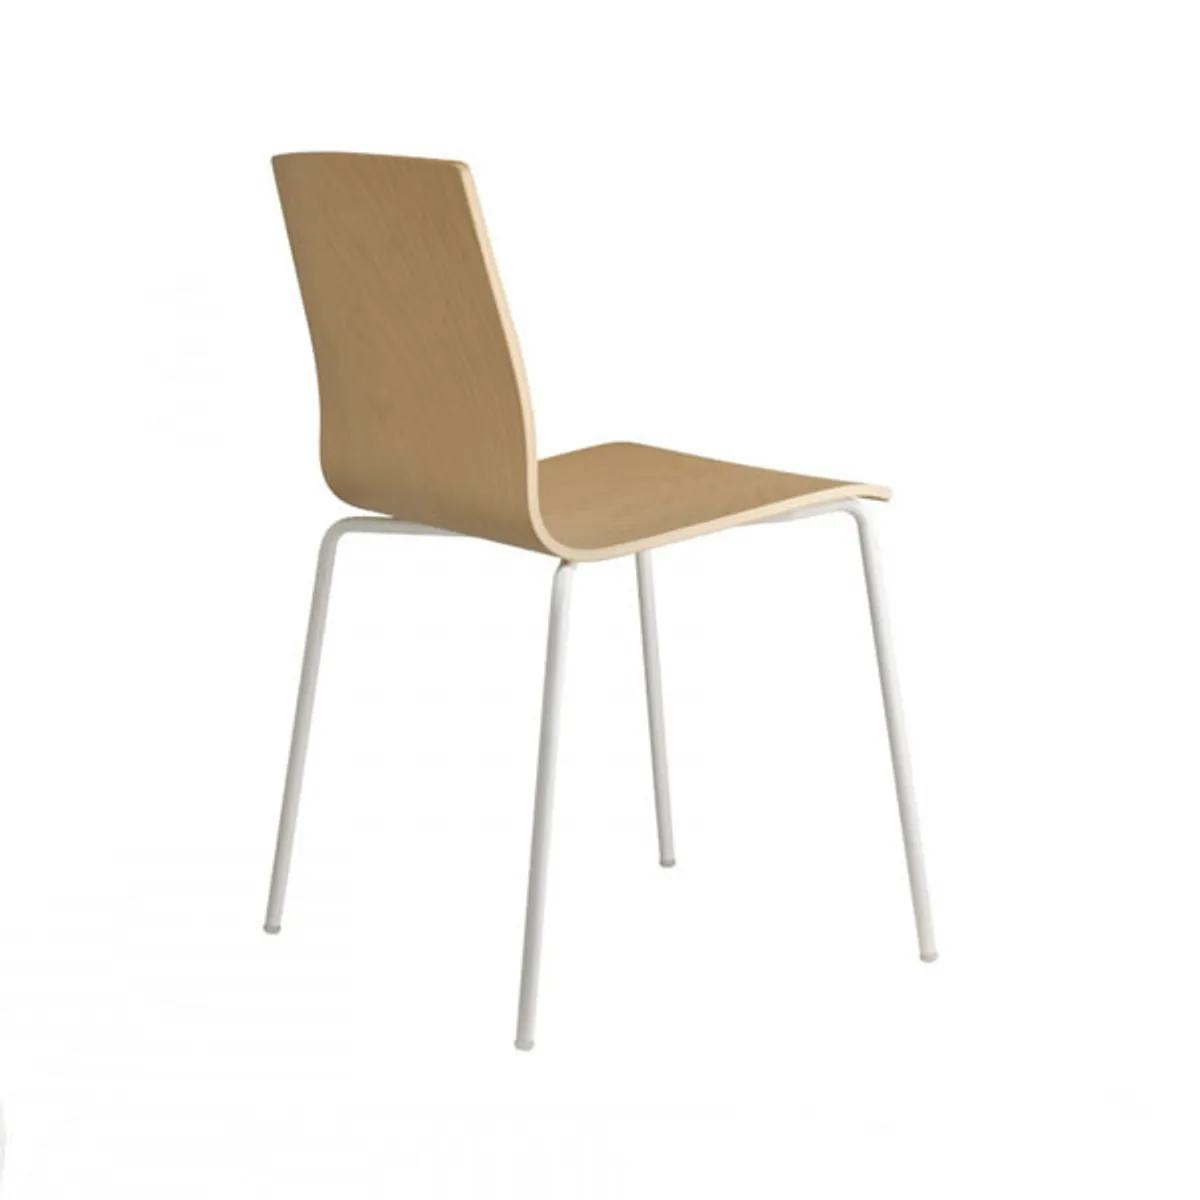 Evie 2 metal side chair 3 Inside Out Contracts